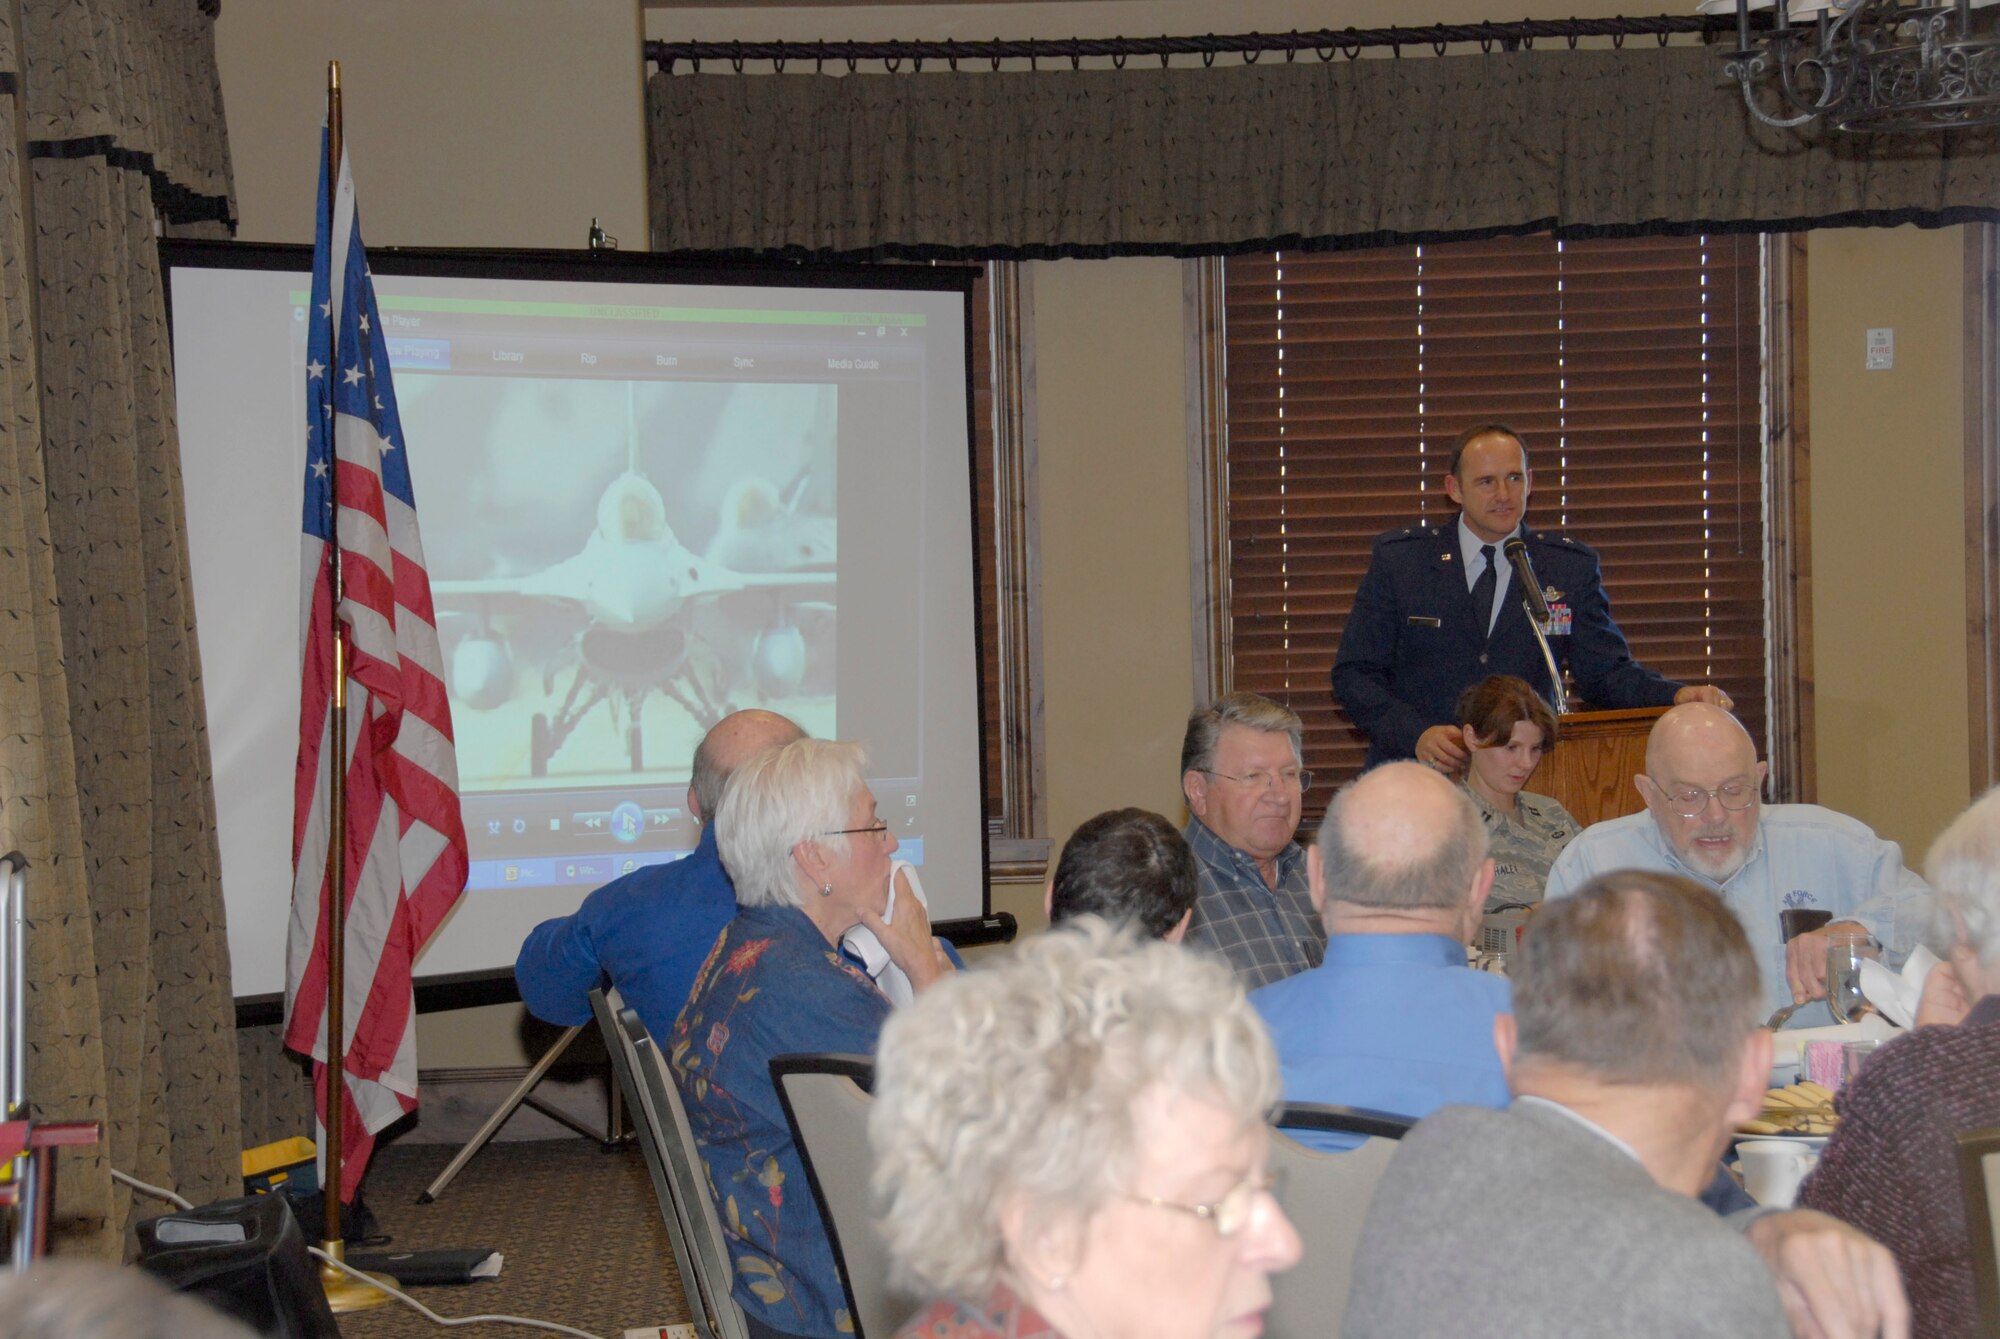 Brigadier General Trulan A. Eyre, 140th Wing Commander address the Air Force Academy Quarterback Club at their quarterly meeting.  General Eyre spoke to the group our their Colorado Air National Guard.